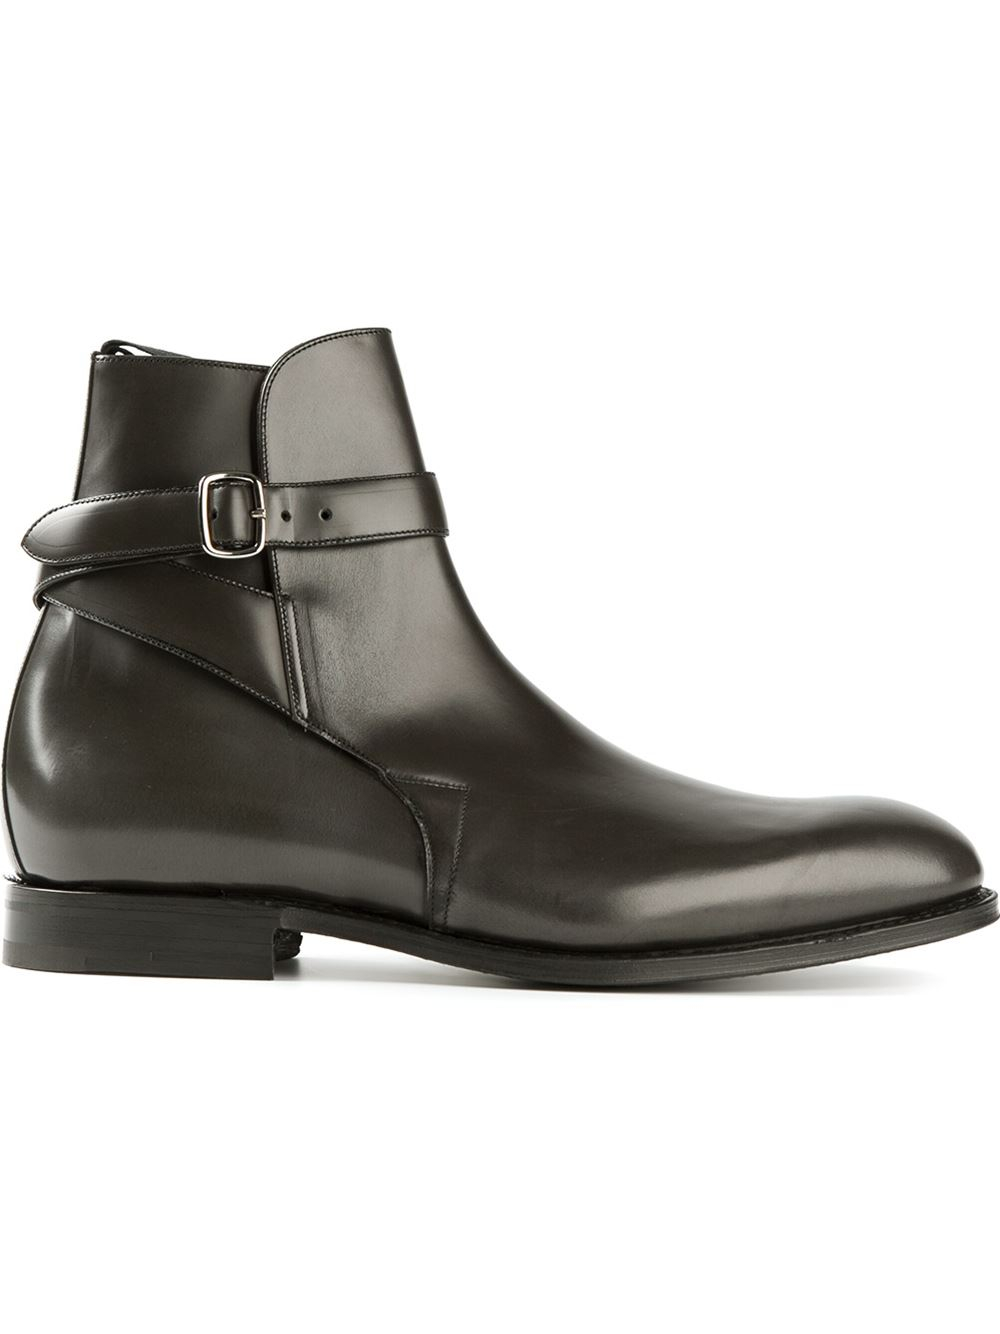 Lyst - Church'S Bcukle Strap Ankle Boots in Black for Men